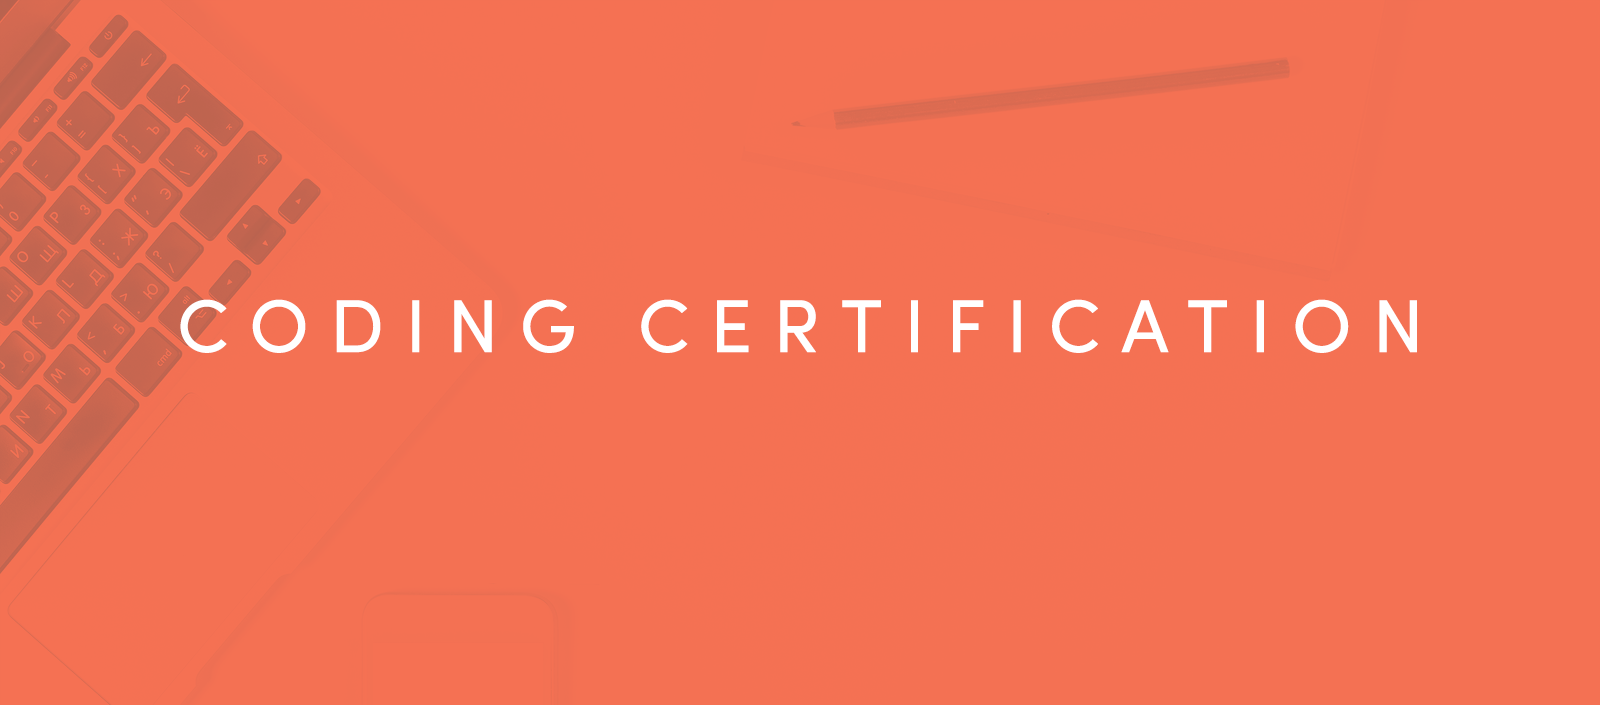 Coding is one of the skills needed to get that leverage in this digital age. Coding certification does not just boost your resume; it provides you better control of your site and your career track in general.